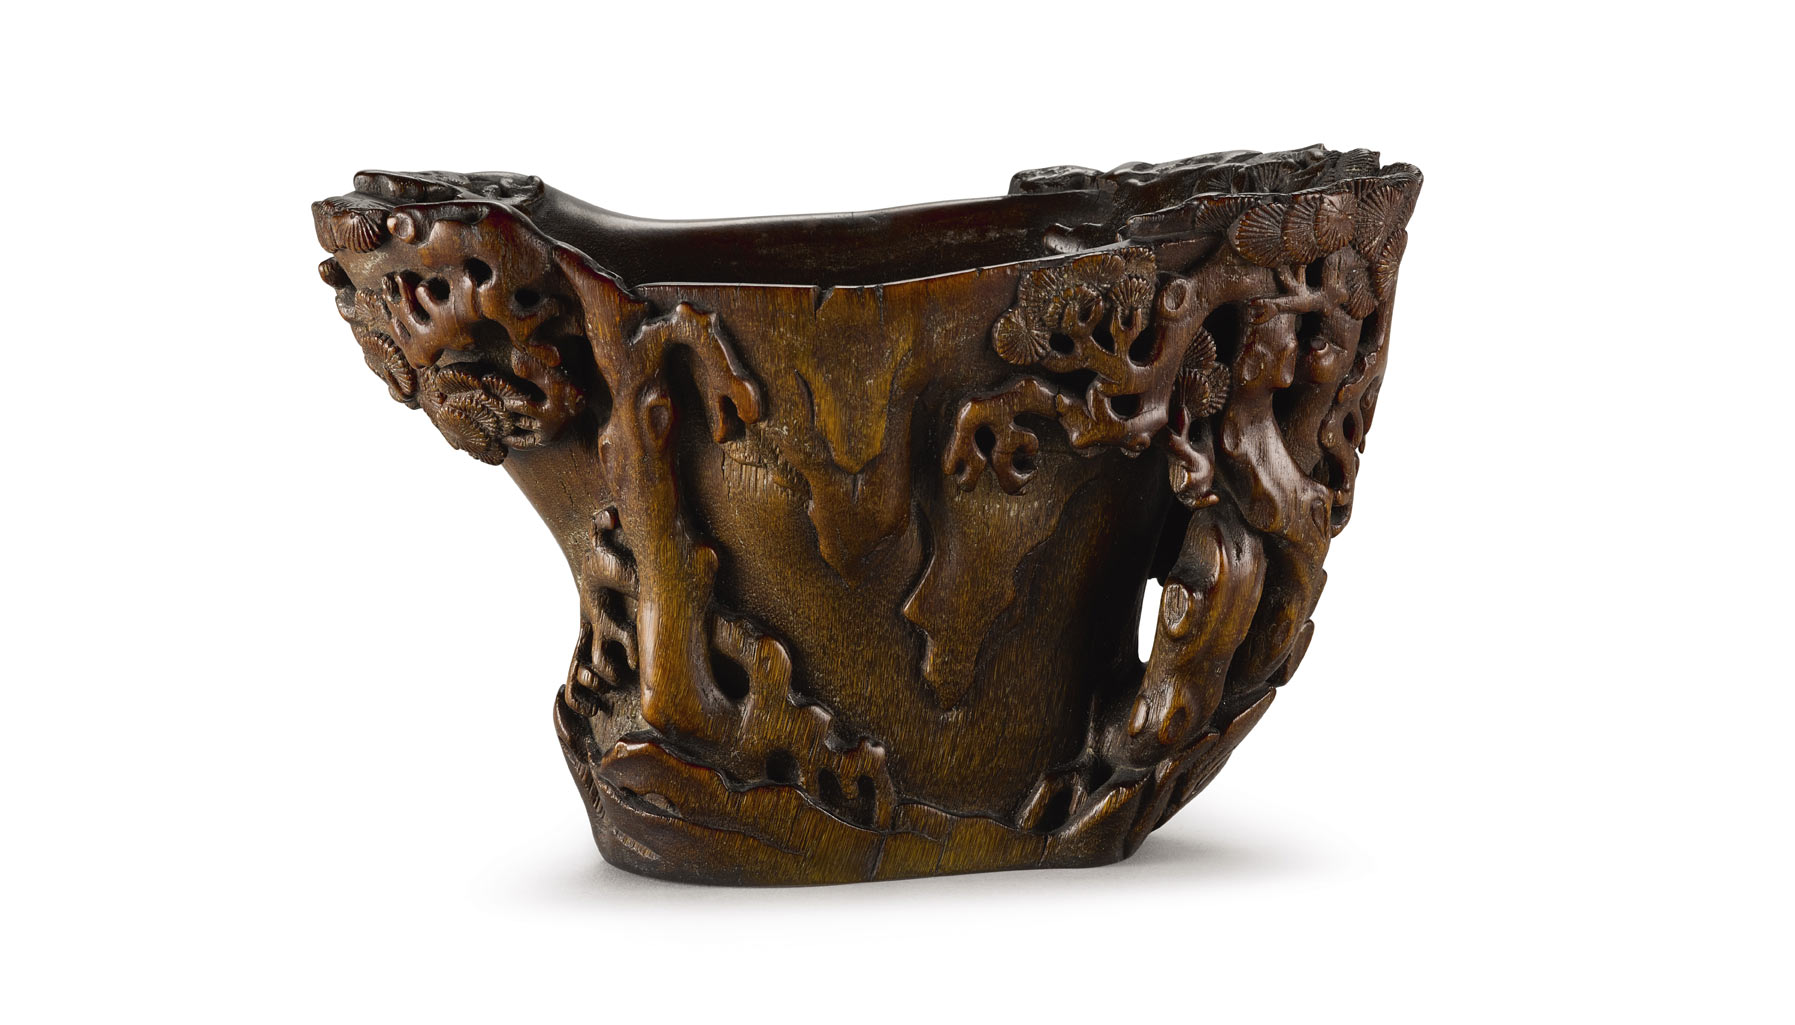 Chinese antique teacup, Sotheby’s Chinese art sale